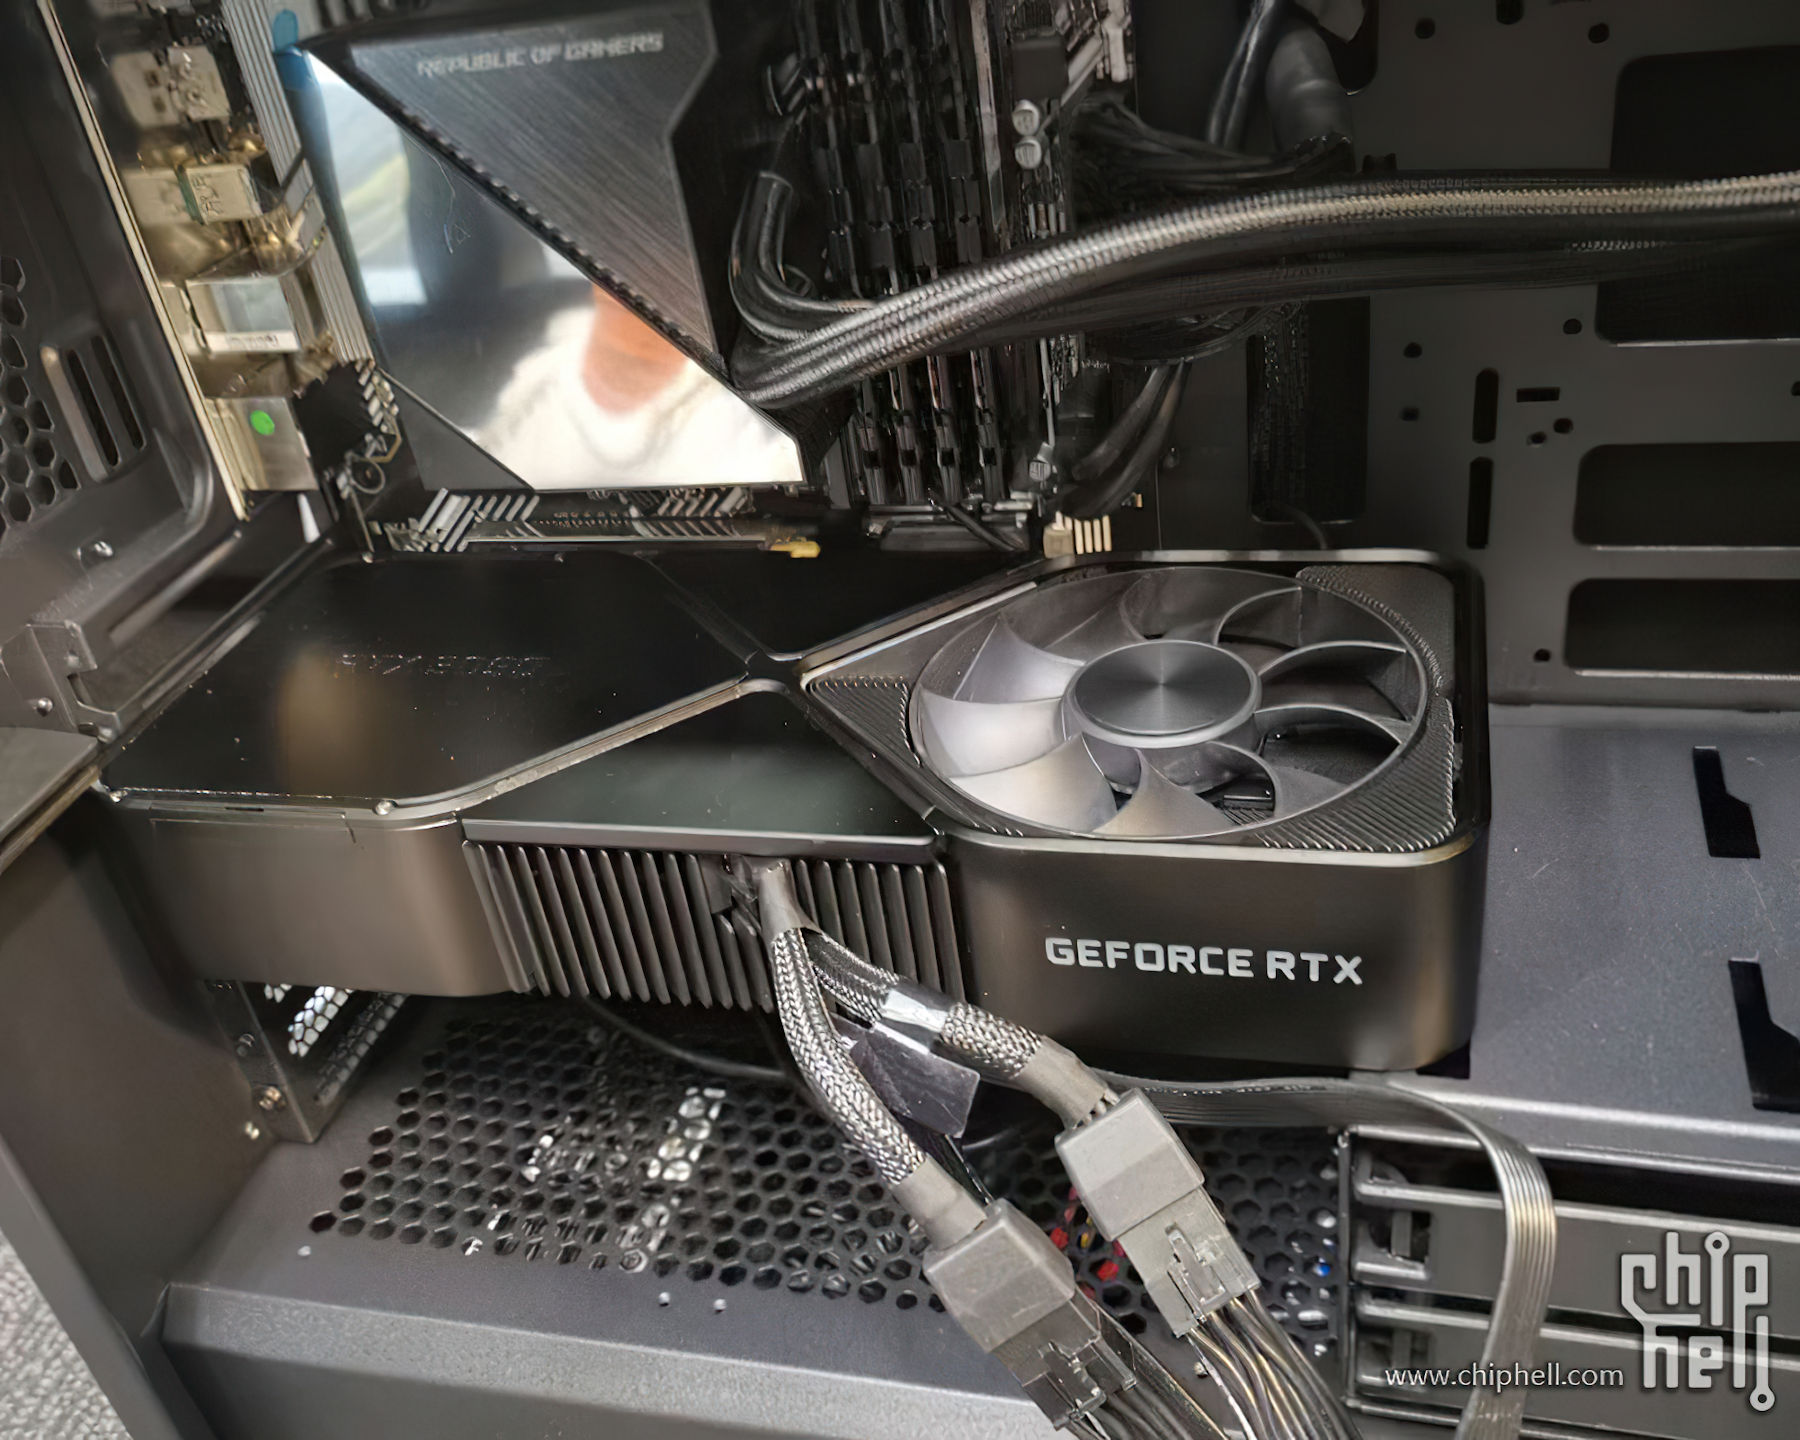 This Is How Nvidia Geforce Rtx 3090 Looks In A Case